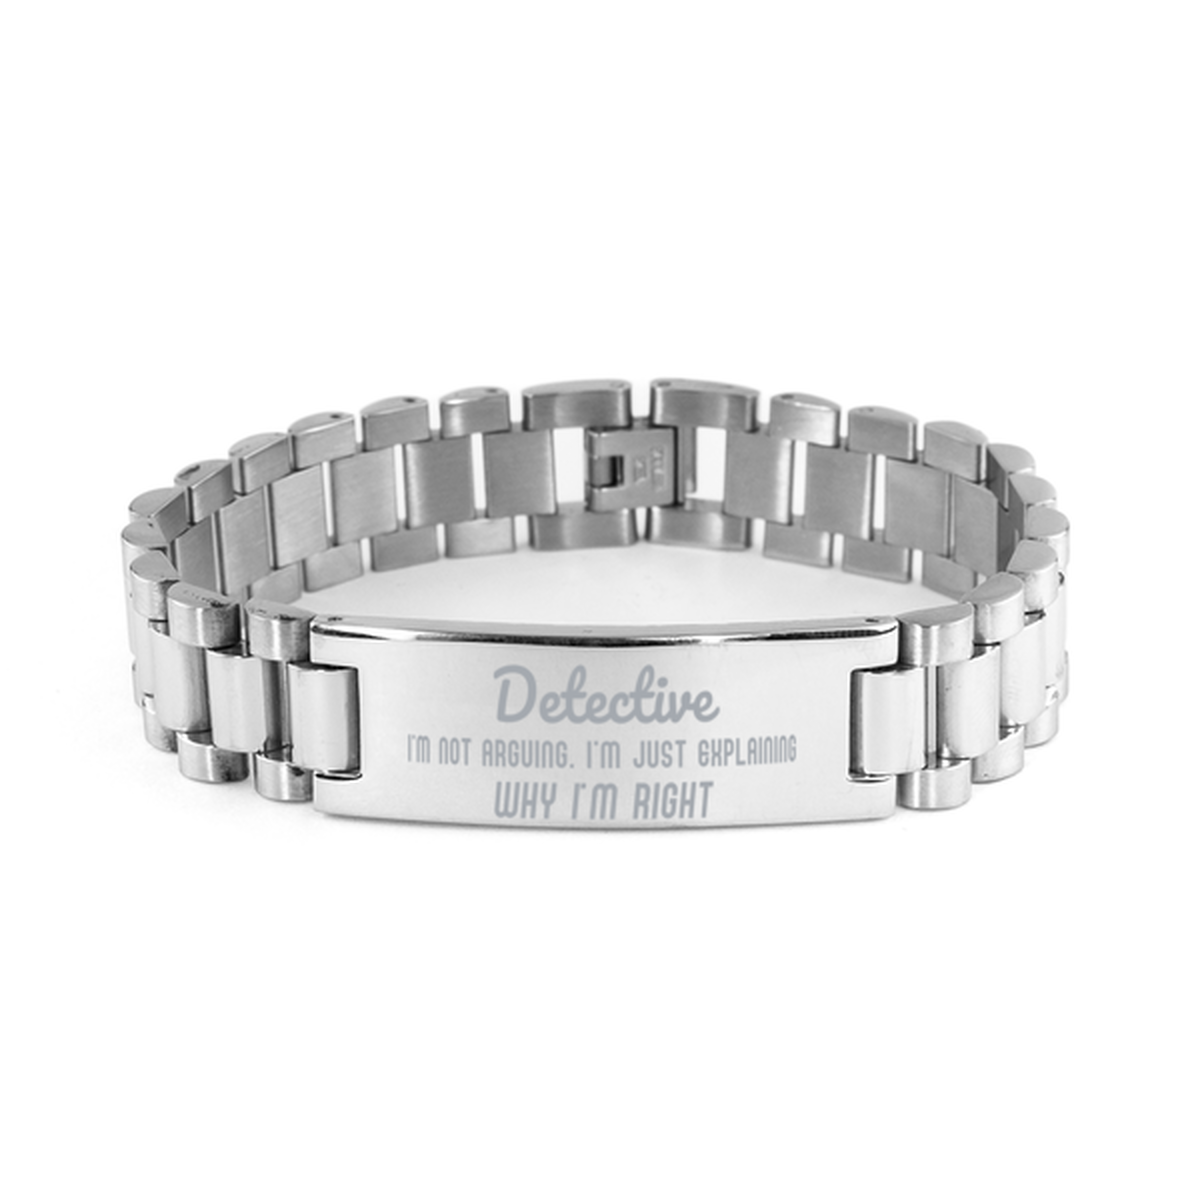 Detective I'm not Arguing. I'm Just Explaining Why I'm RIGHT Ladder Stainless Steel Bracelet, Graduation Birthday Christmas Detective Gifts For Detective Funny Saying Quote Present for Men Women Coworker